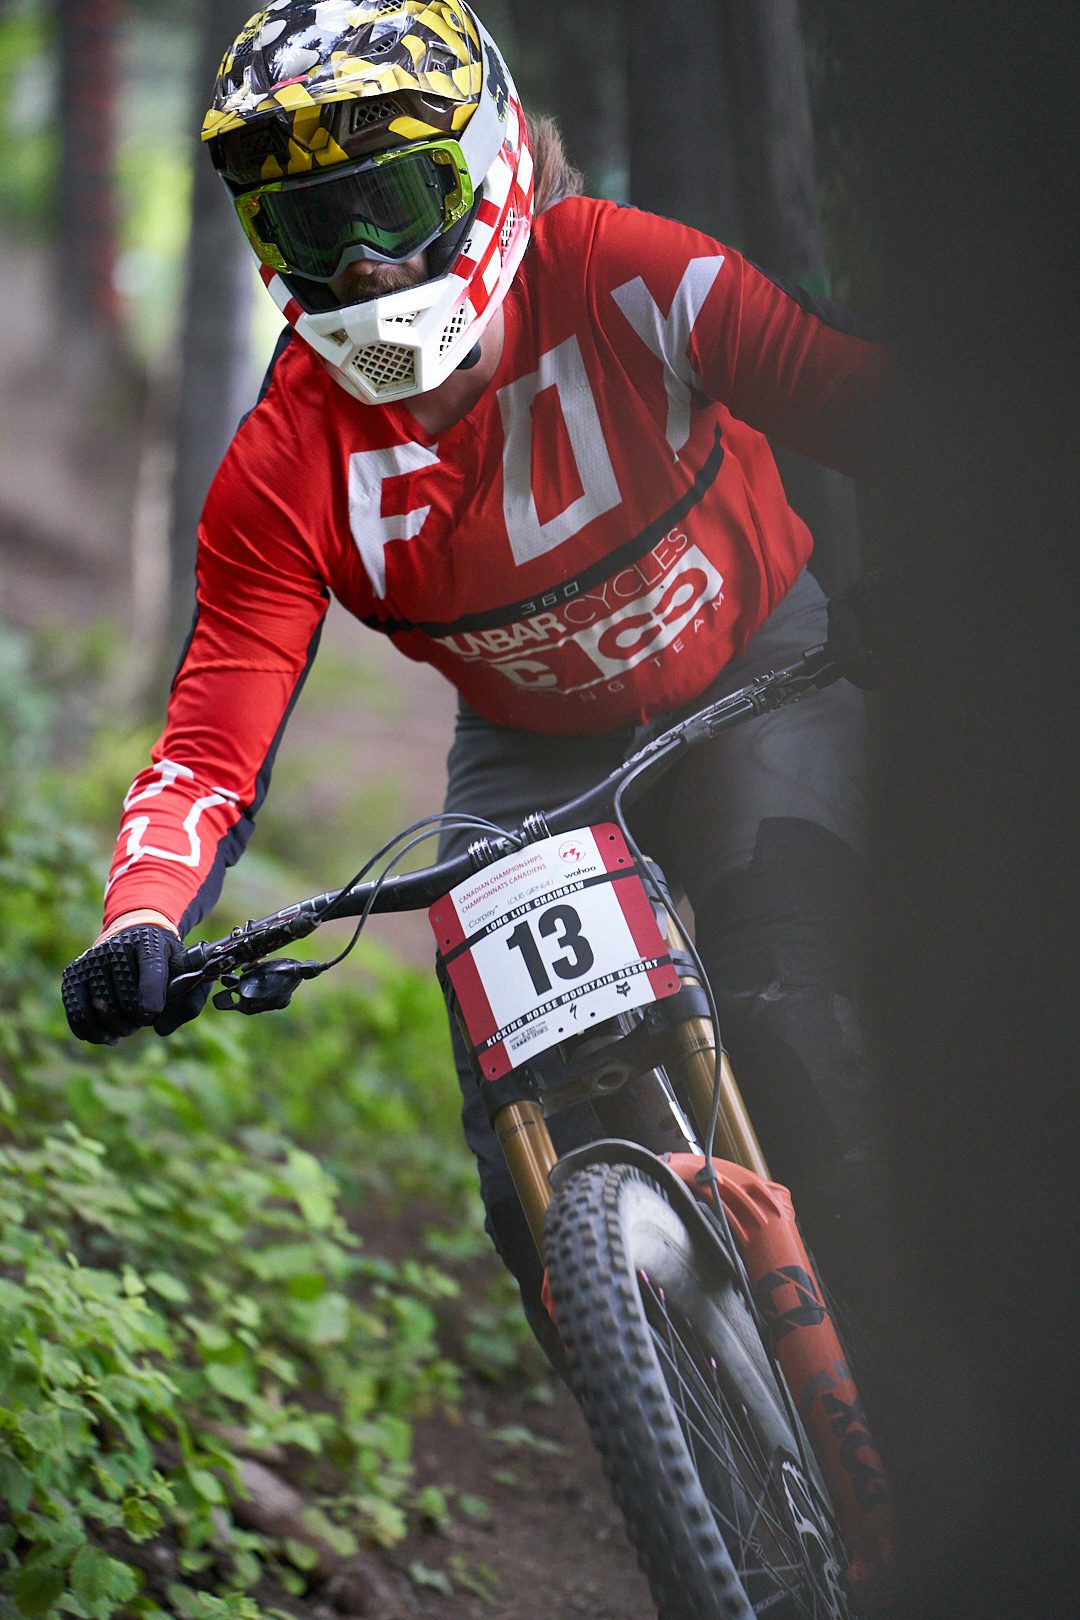 Gabe Neuron races Canadian downhill national championships 